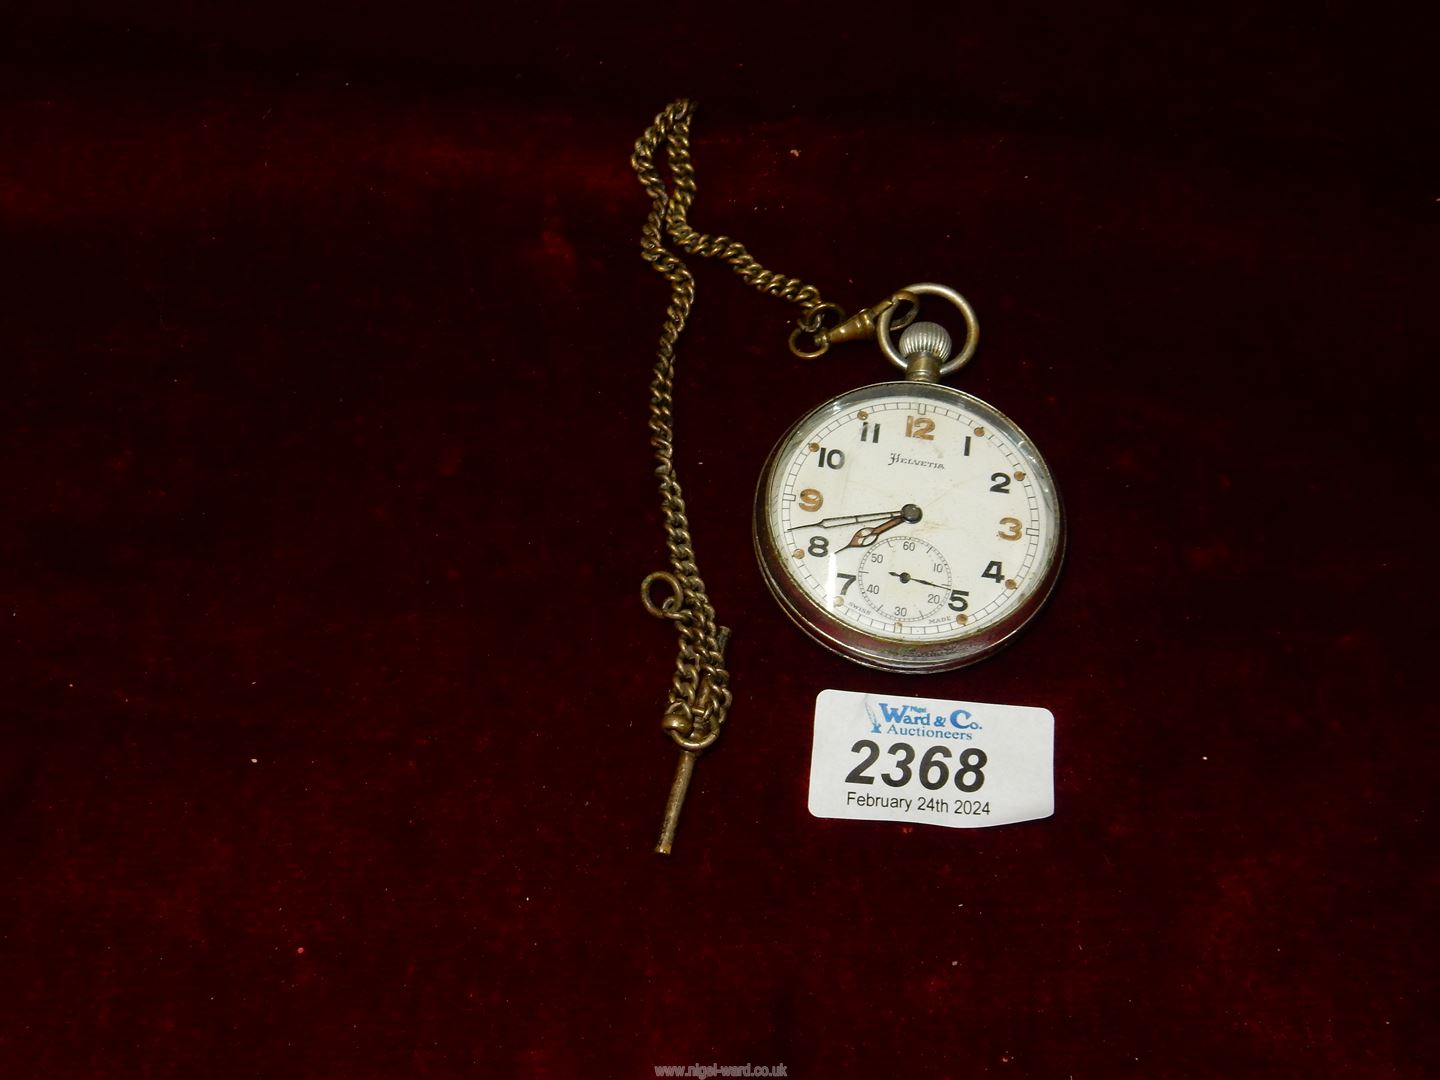 A Helvetia military issue Pocket watch (worn condition).